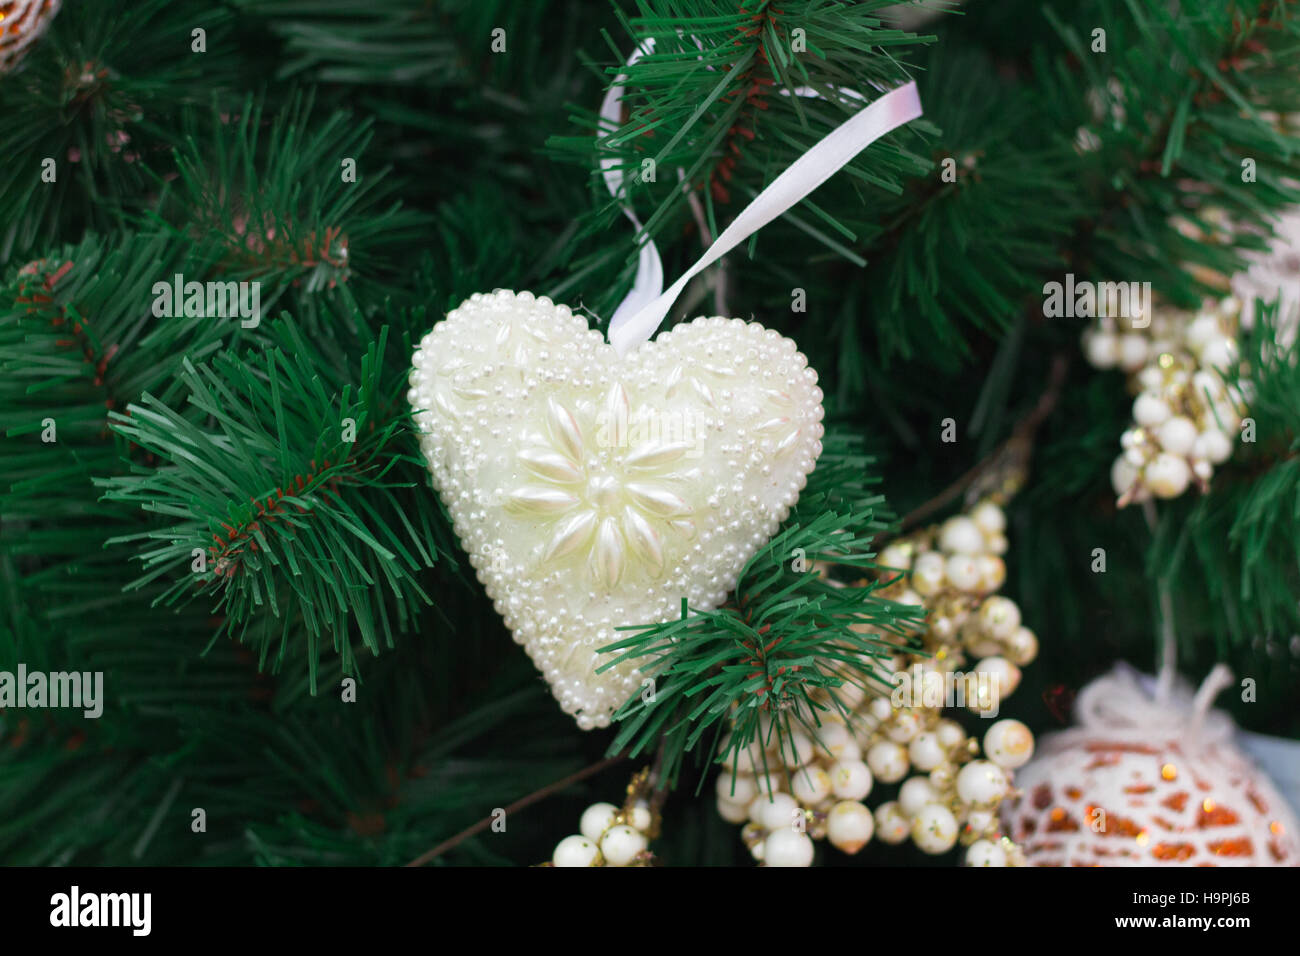 Christmas and New Year seasonal decoration, green tree branches with white heart and golden ornaments Stock Photo